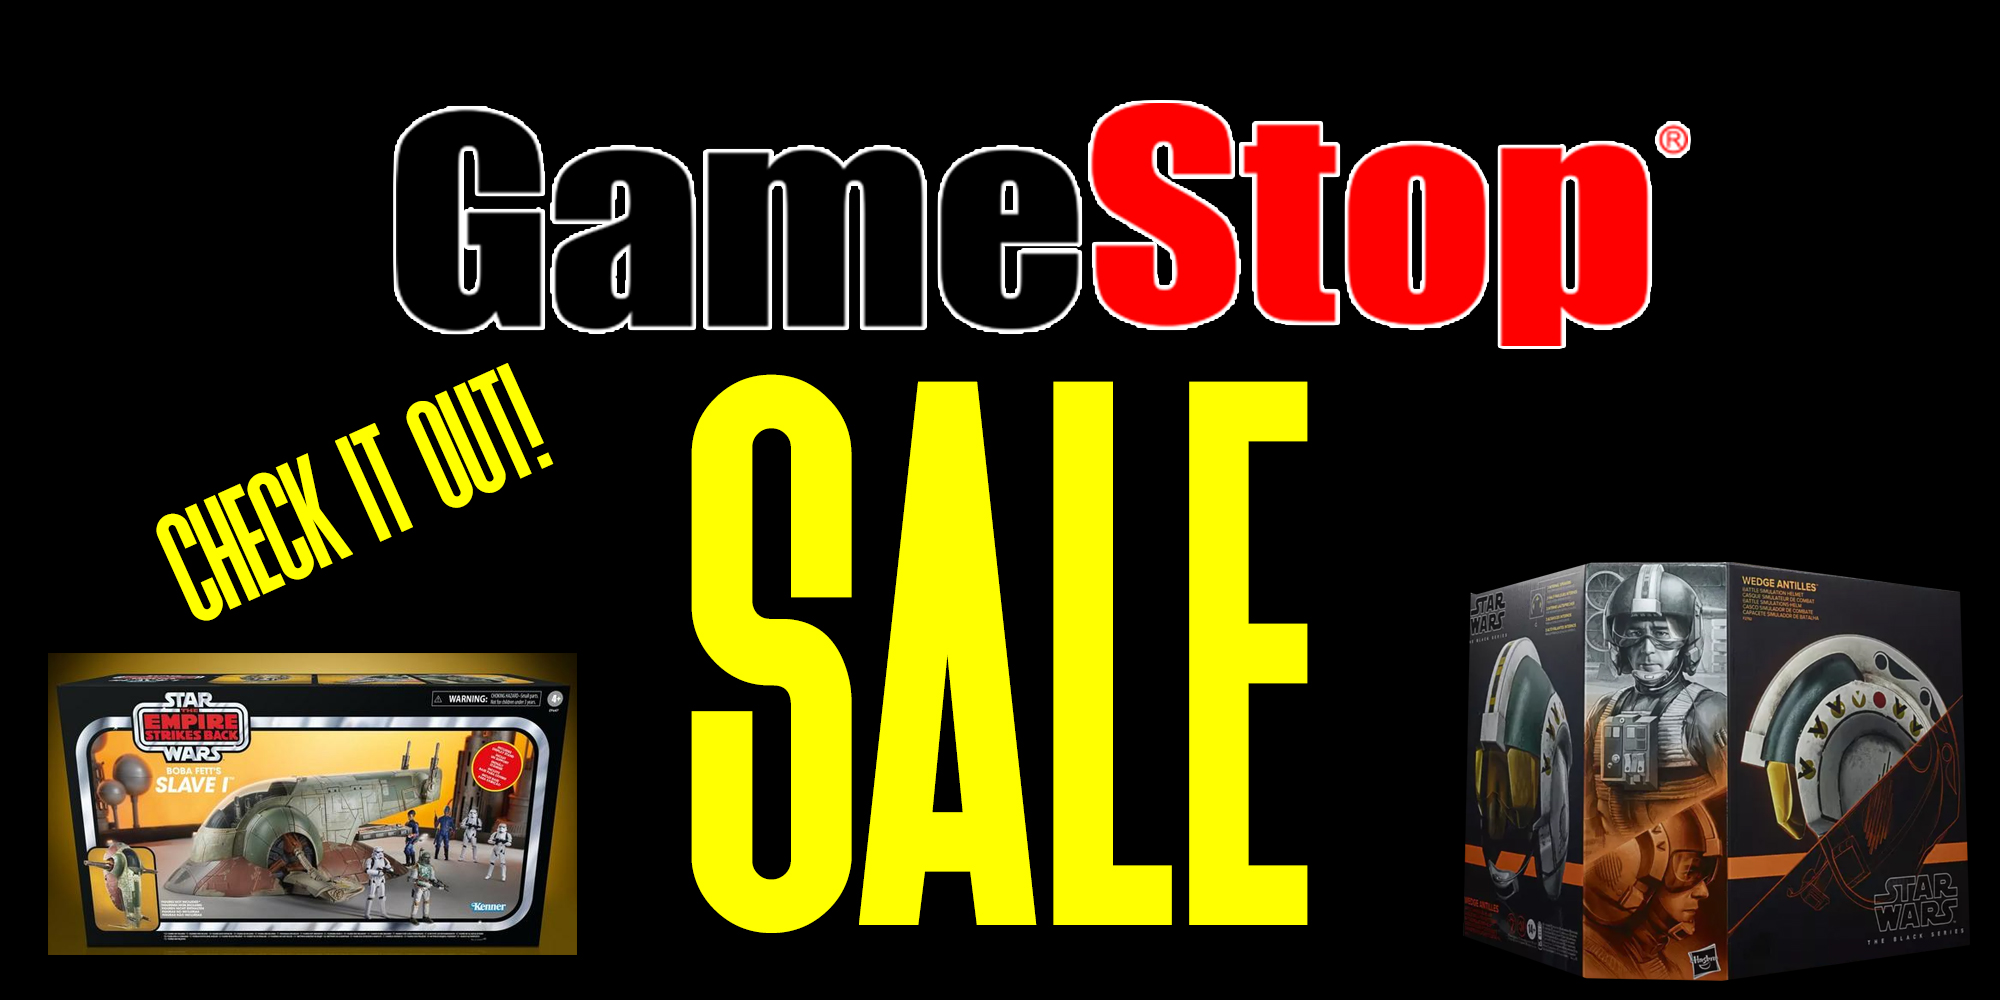 Check Out This Awesome GameStop Sale!